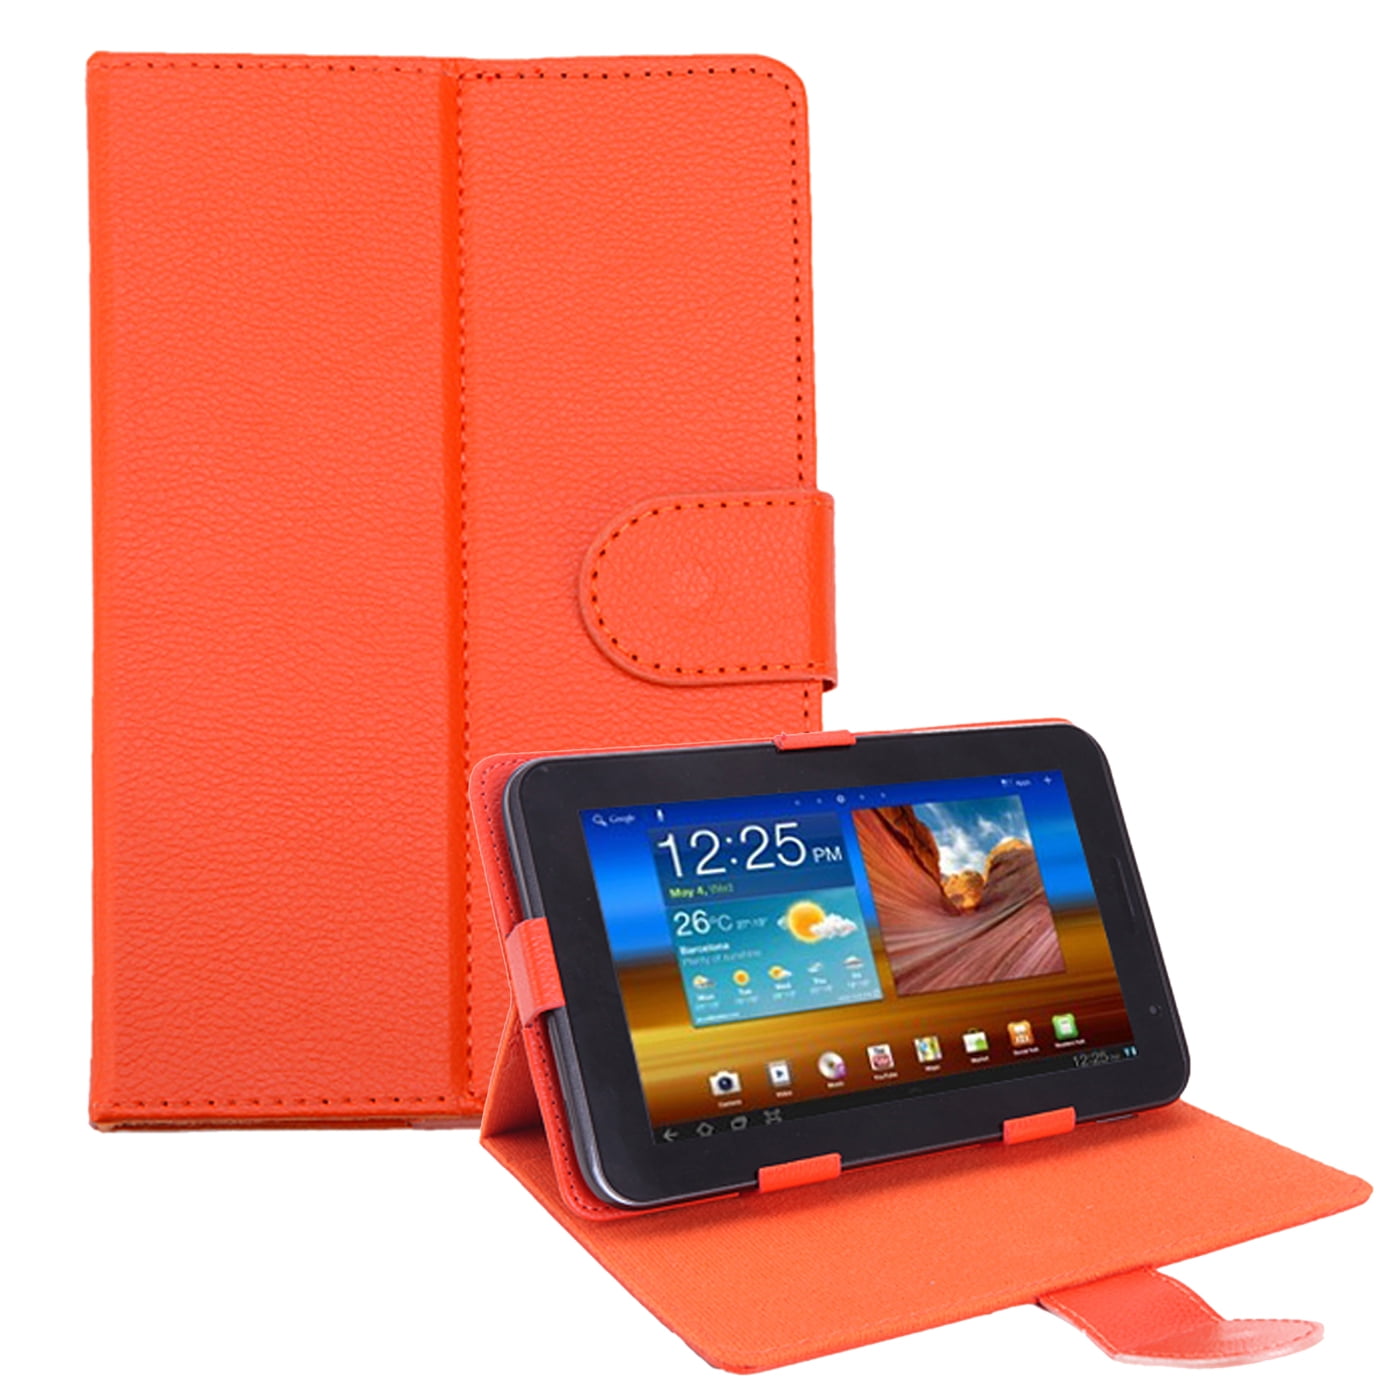 HDE Universal 7 Inch Tablet Leather Folio Cover Multi Angle Stand for RCA Voyager II Pro (Orange) - Walmart.com